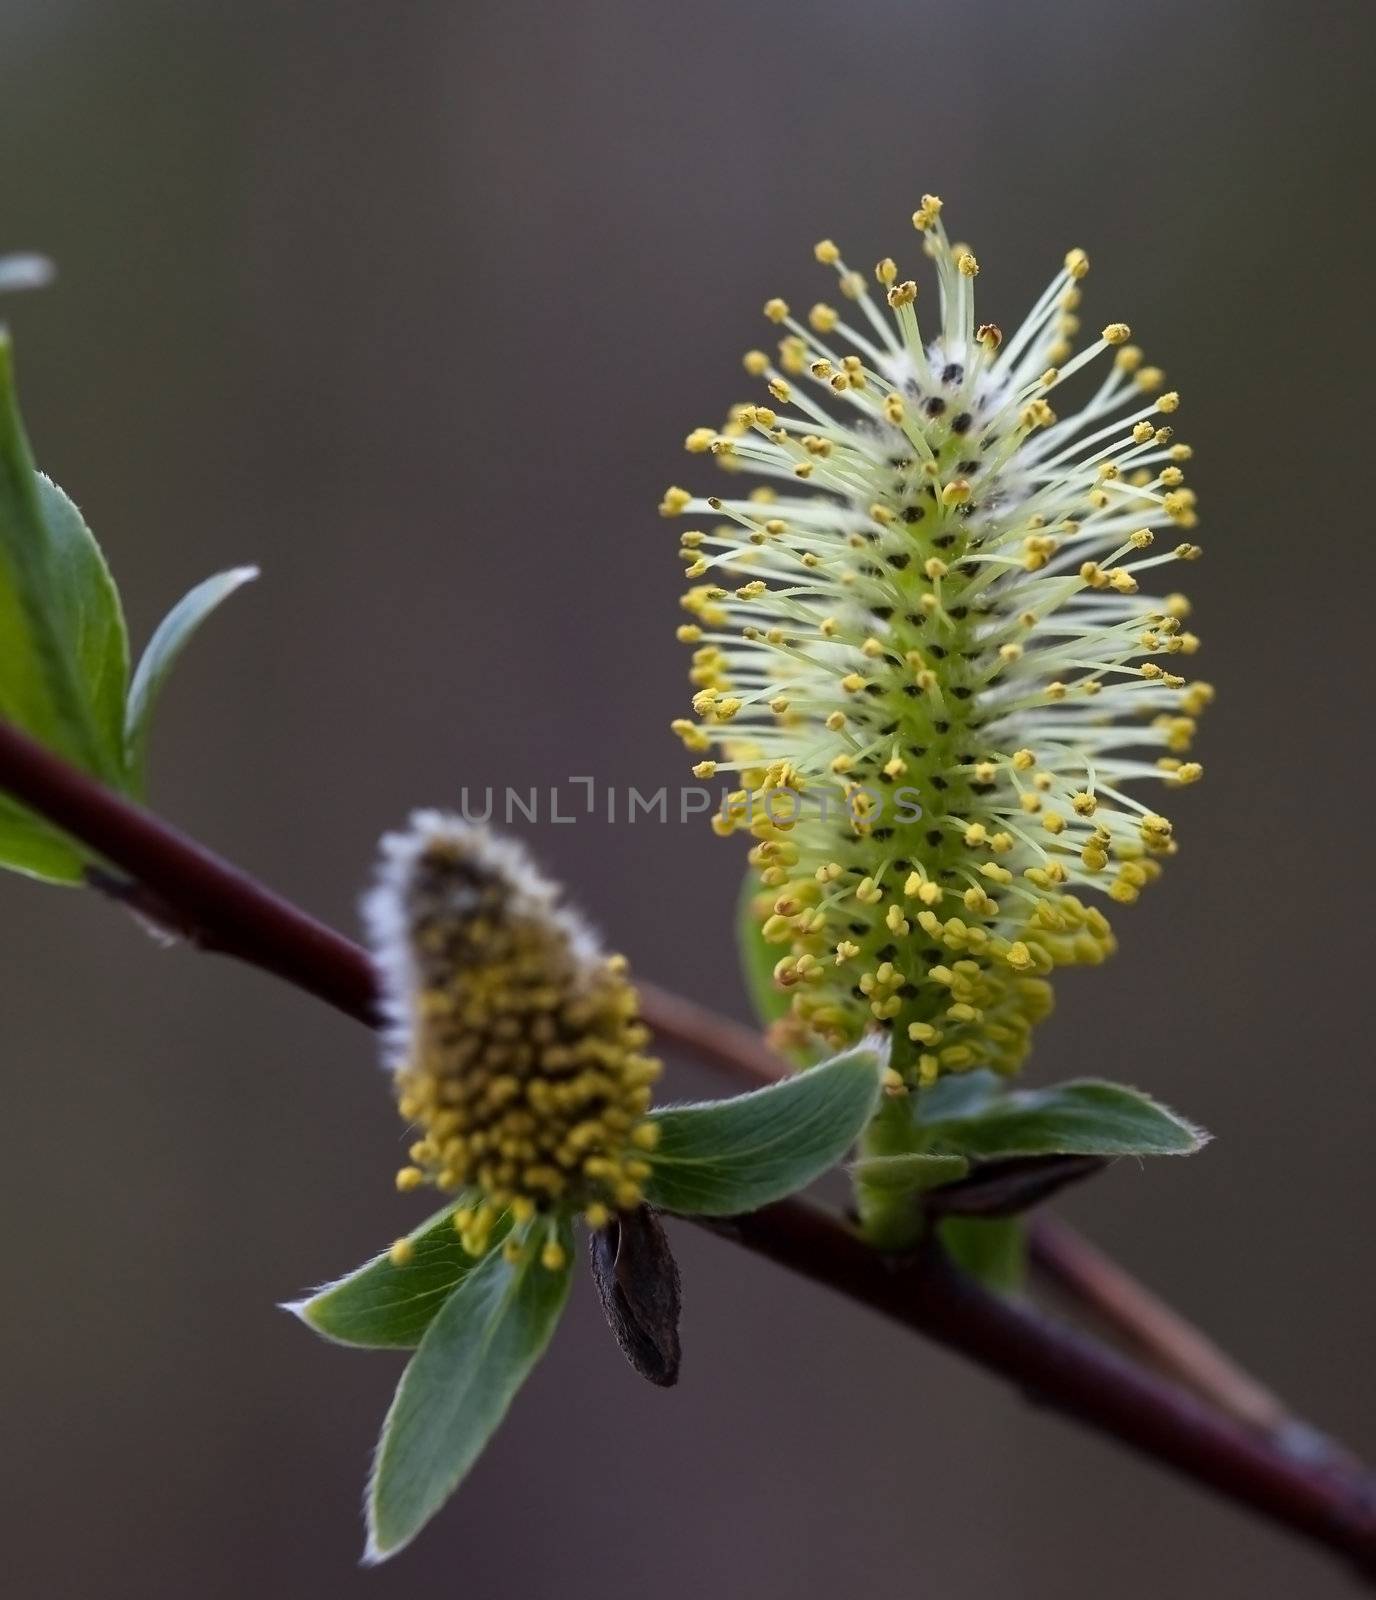 Willow (Salix) branches in the flowering period. Shallow depth-of-field.